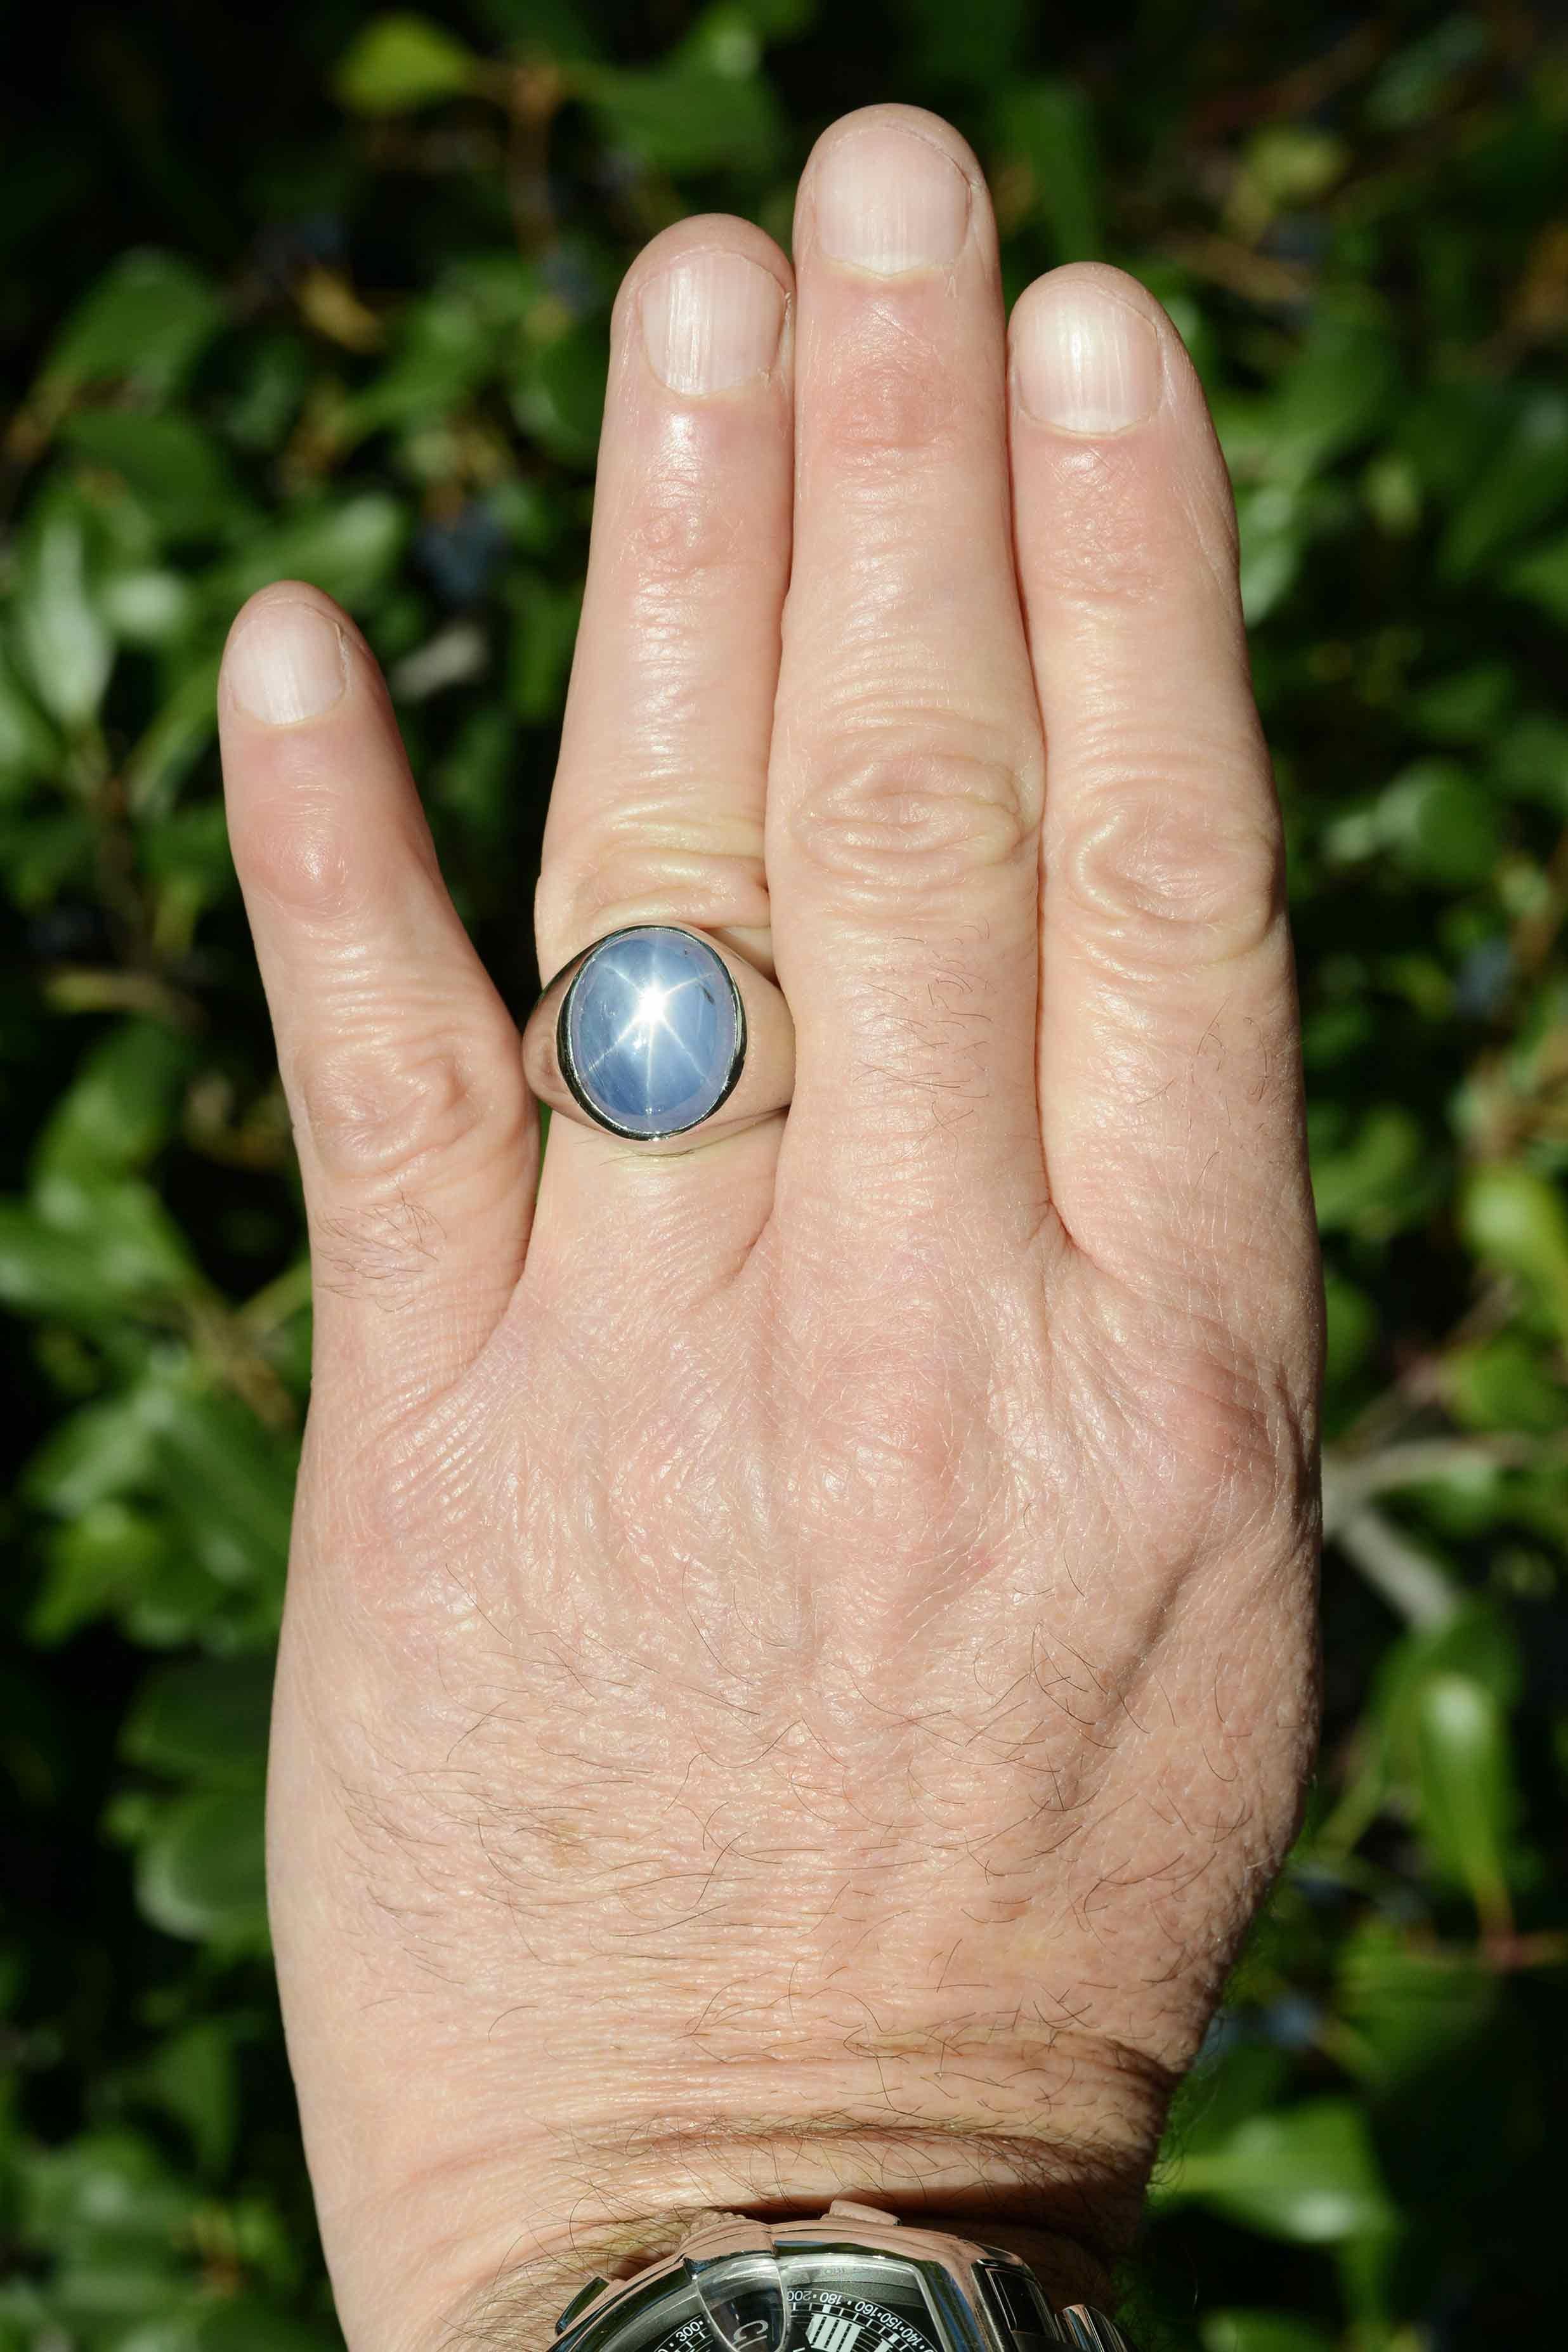 An Important, monumental Tiffany star sapphire mens ring. Centered by a dome cabochon weighing a considerable 26 carats. Set in a heavy platinum mount, the smooth, Mid Century style slips on your finger effortlessly and projects an impeccable style.